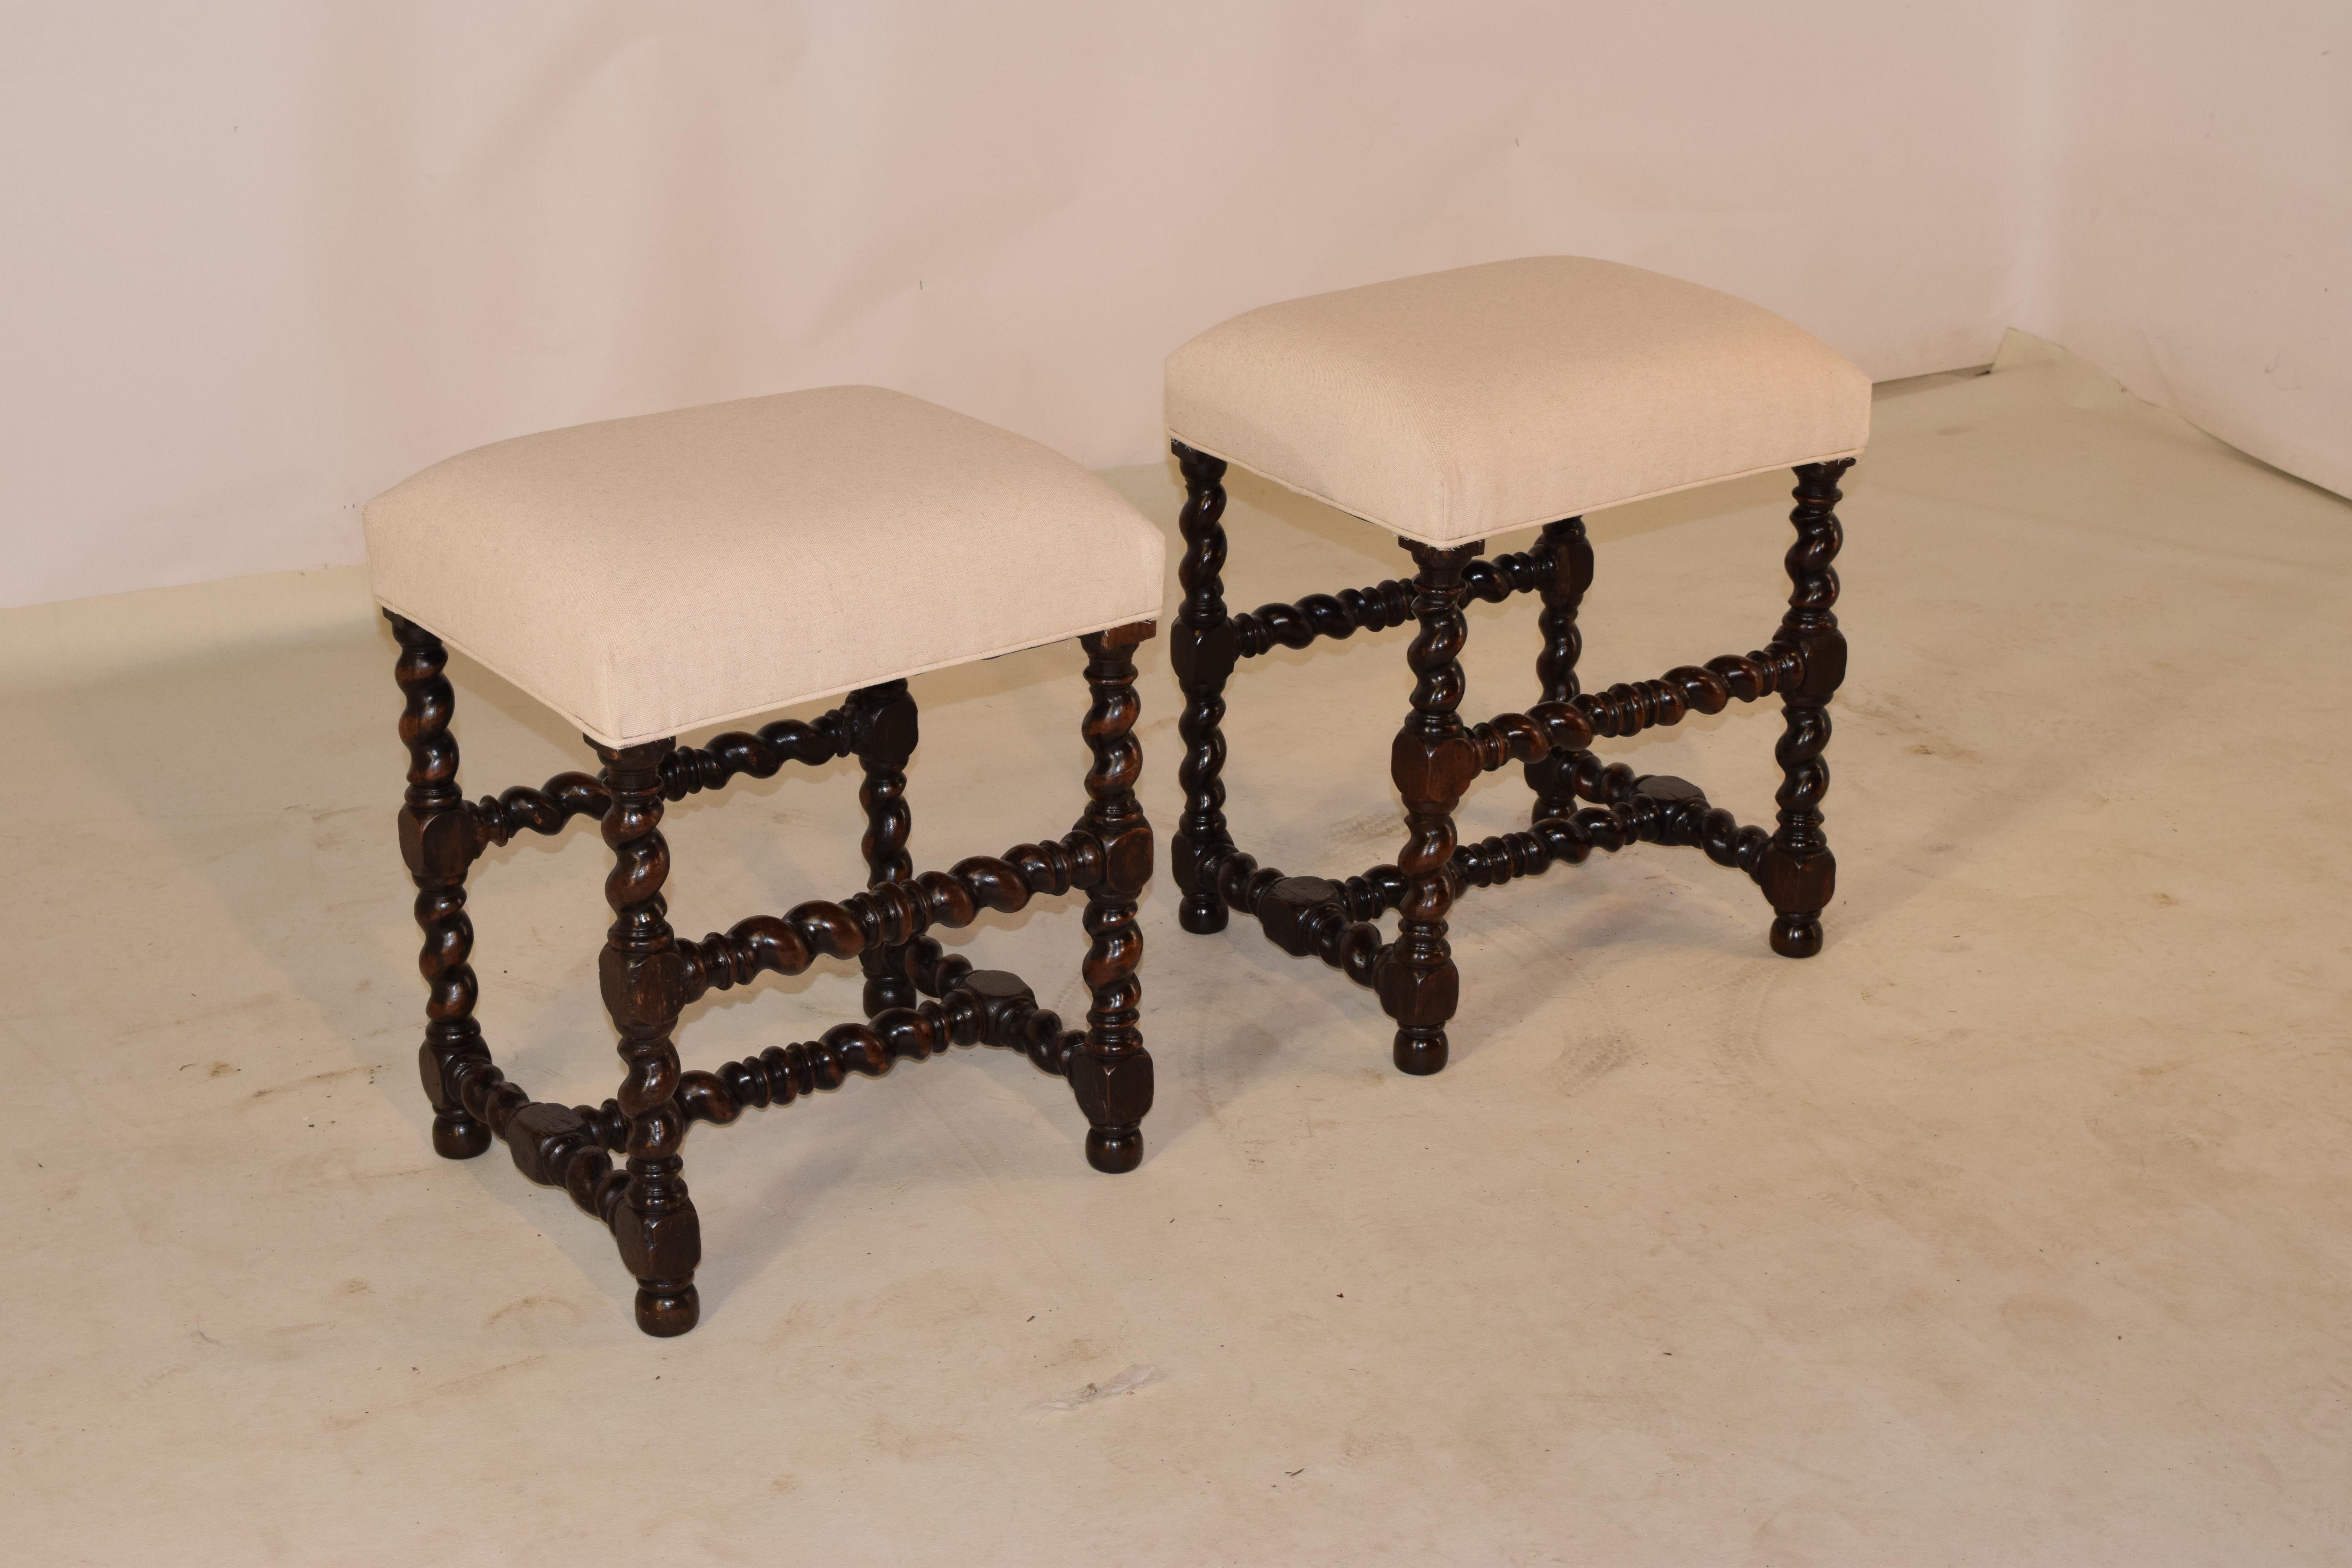 Pair of 19th century oak stools from France with newly upholstered linen seats. The frames are made from hand turned barley twist legs, joined by matching stretchers, and raised on hand turned feet.